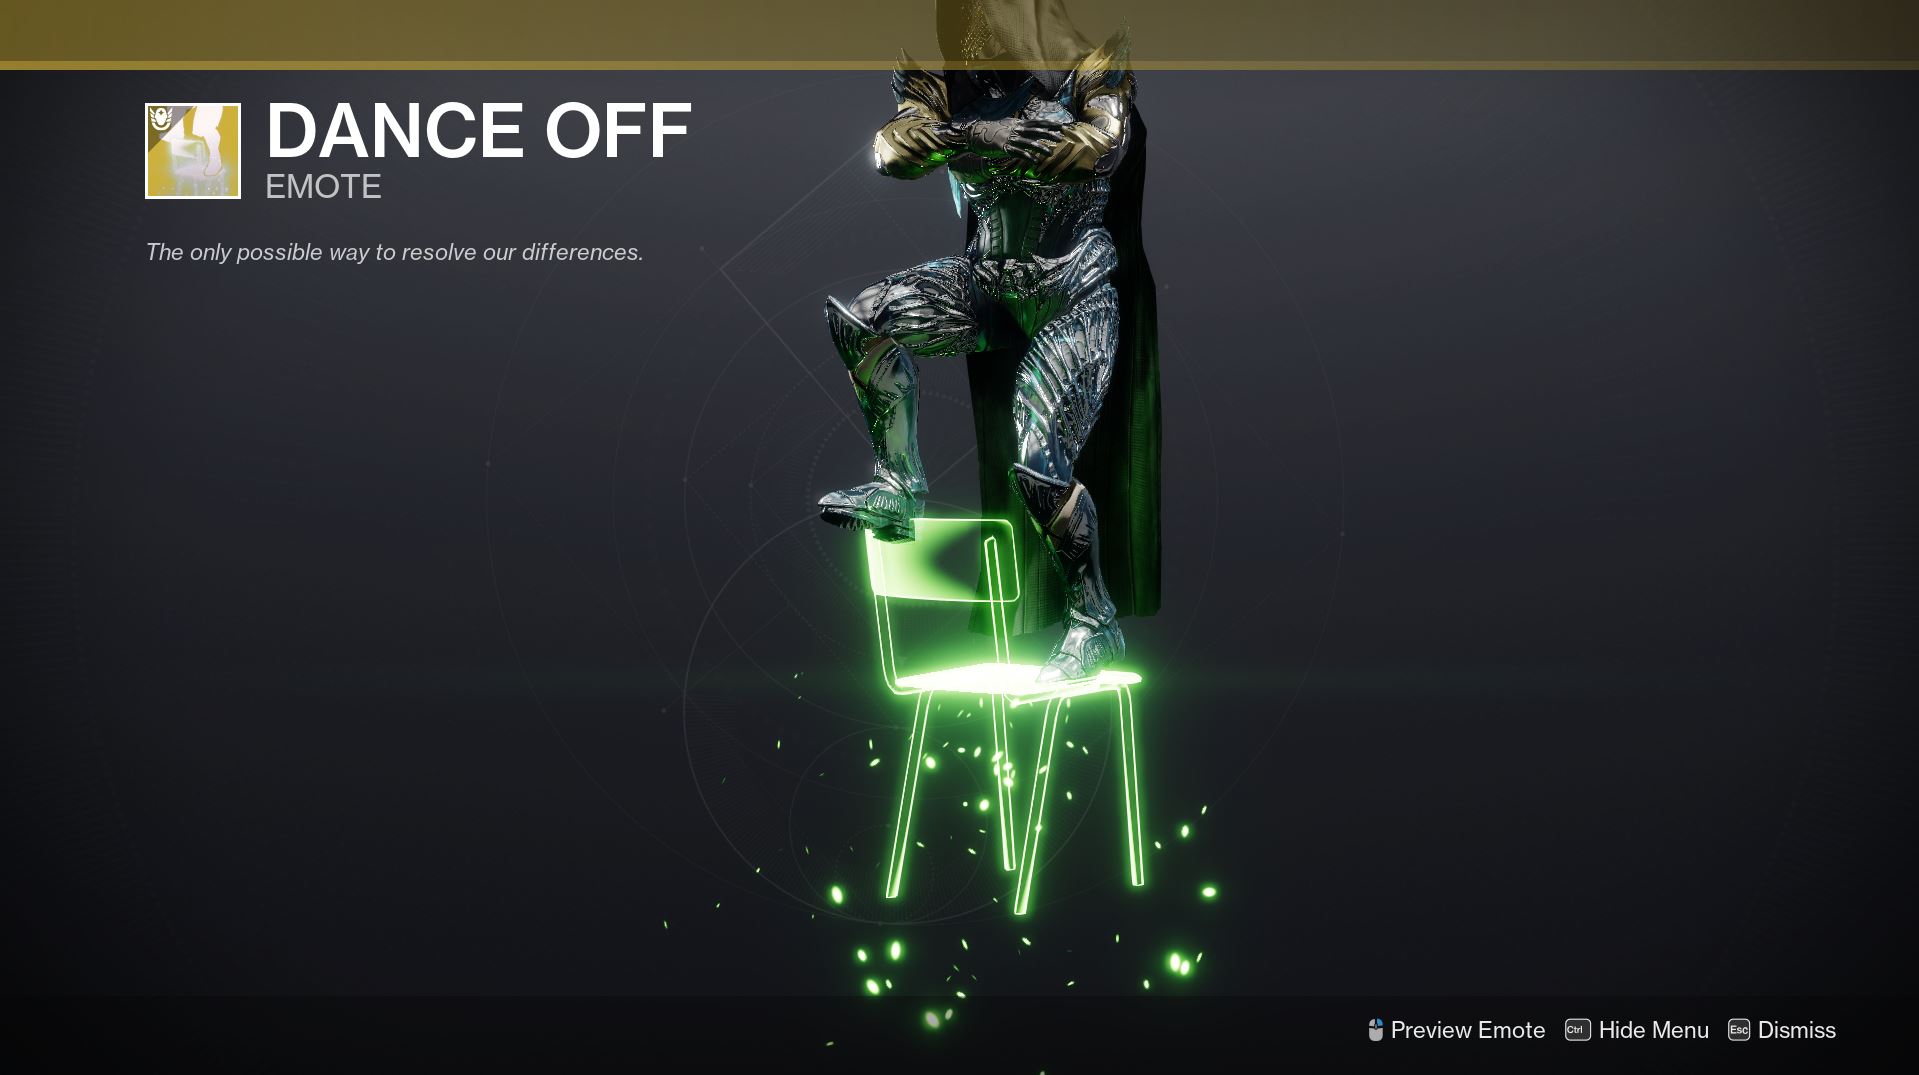 Destiny 2 Red Subclass Dance off emote